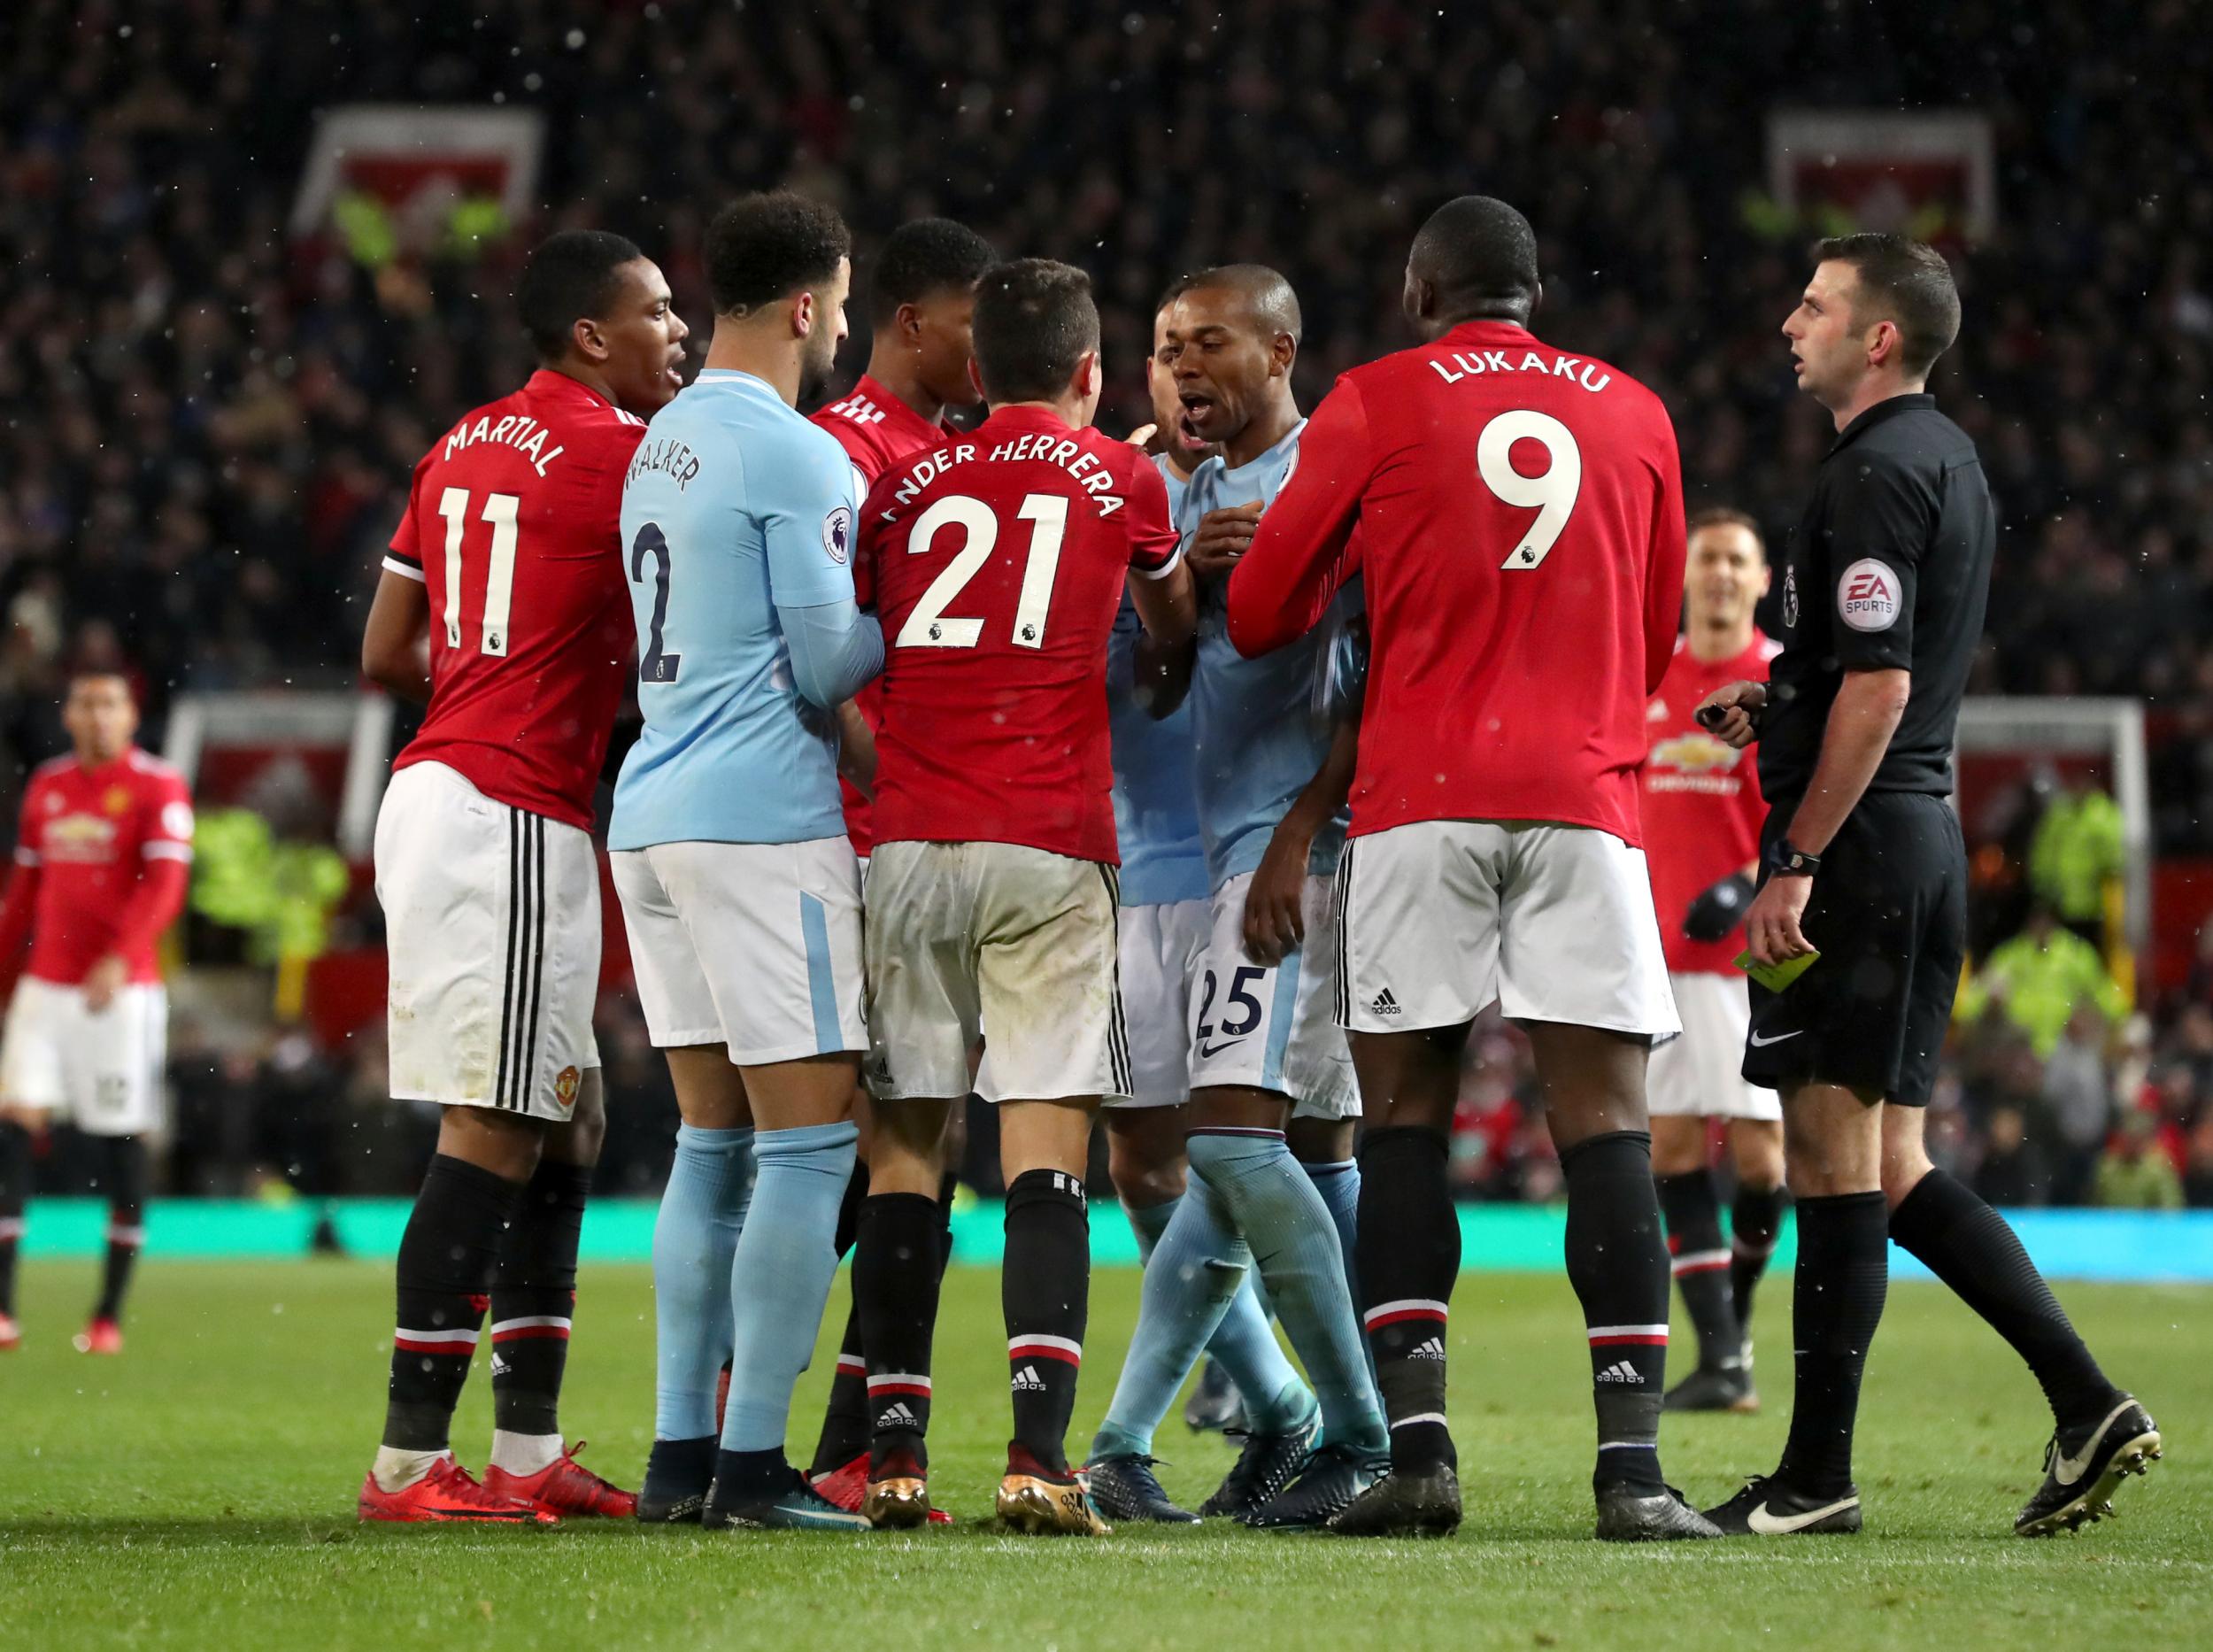 Liverpool&apos;s Champions League win has altered landscape of Manchester derby – it&apos;s now a game both teams must win